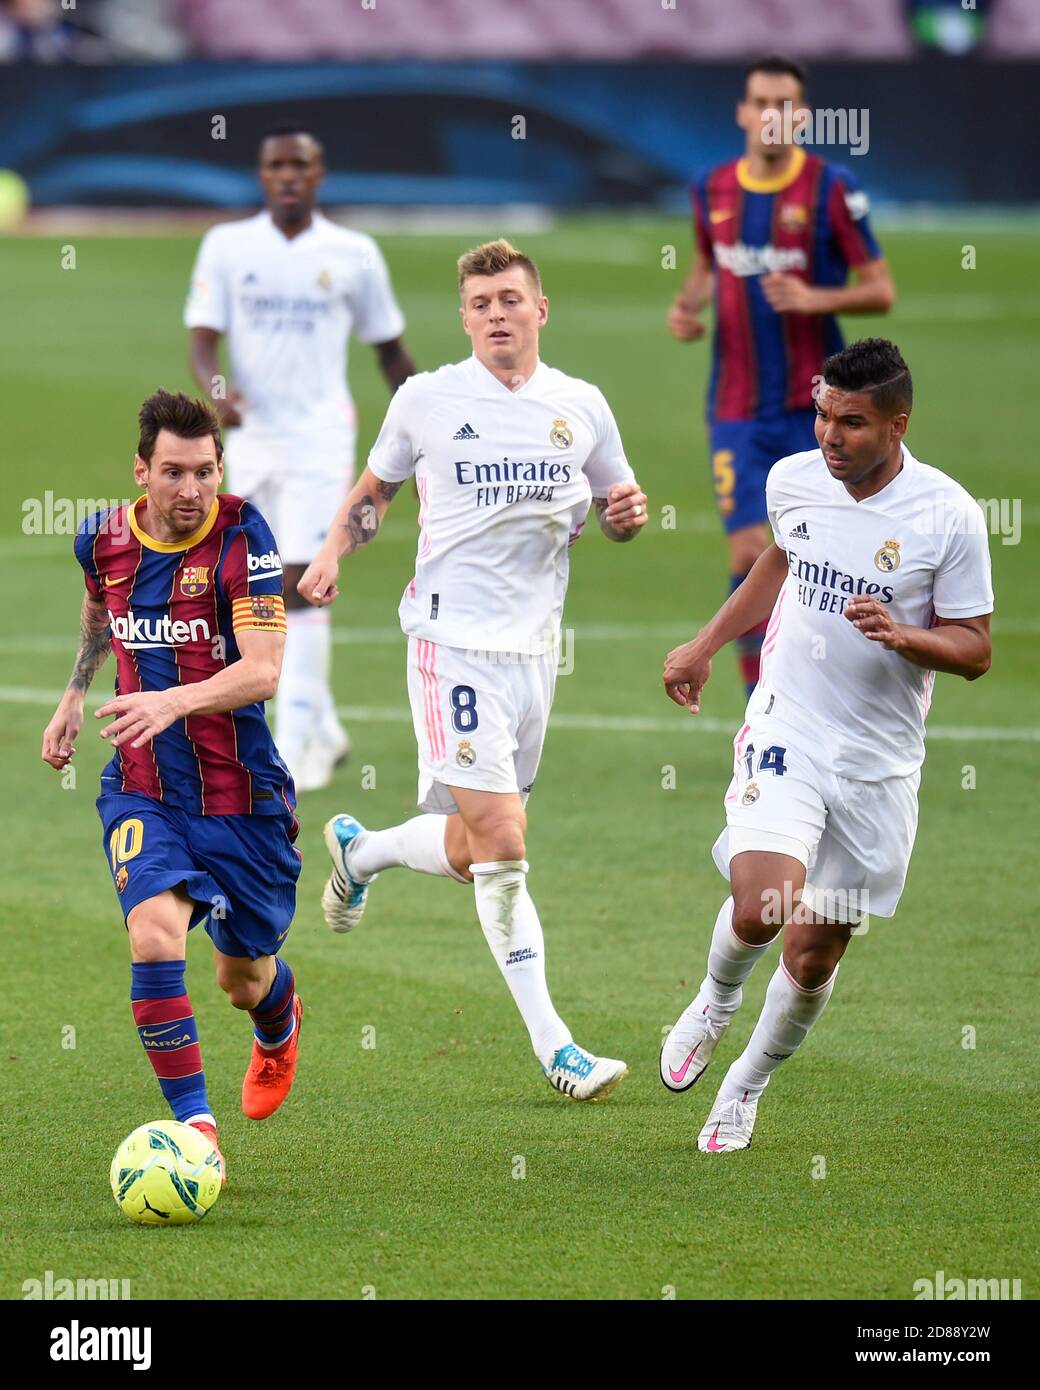 Lionel Messi of FC Barcelona, Toni Kroos and Carlos Henrique Casemiro of Real Madrid during the La Liga match between FC Barcelona and Real Madrid played at Camp Nou Stadium on October 24, 2020 in Barcelona, Spain. (Photo by Sergio Ruiz/PRESSINPHOTO) Credit: Pro Shots/Alamy Live News Stock Photo